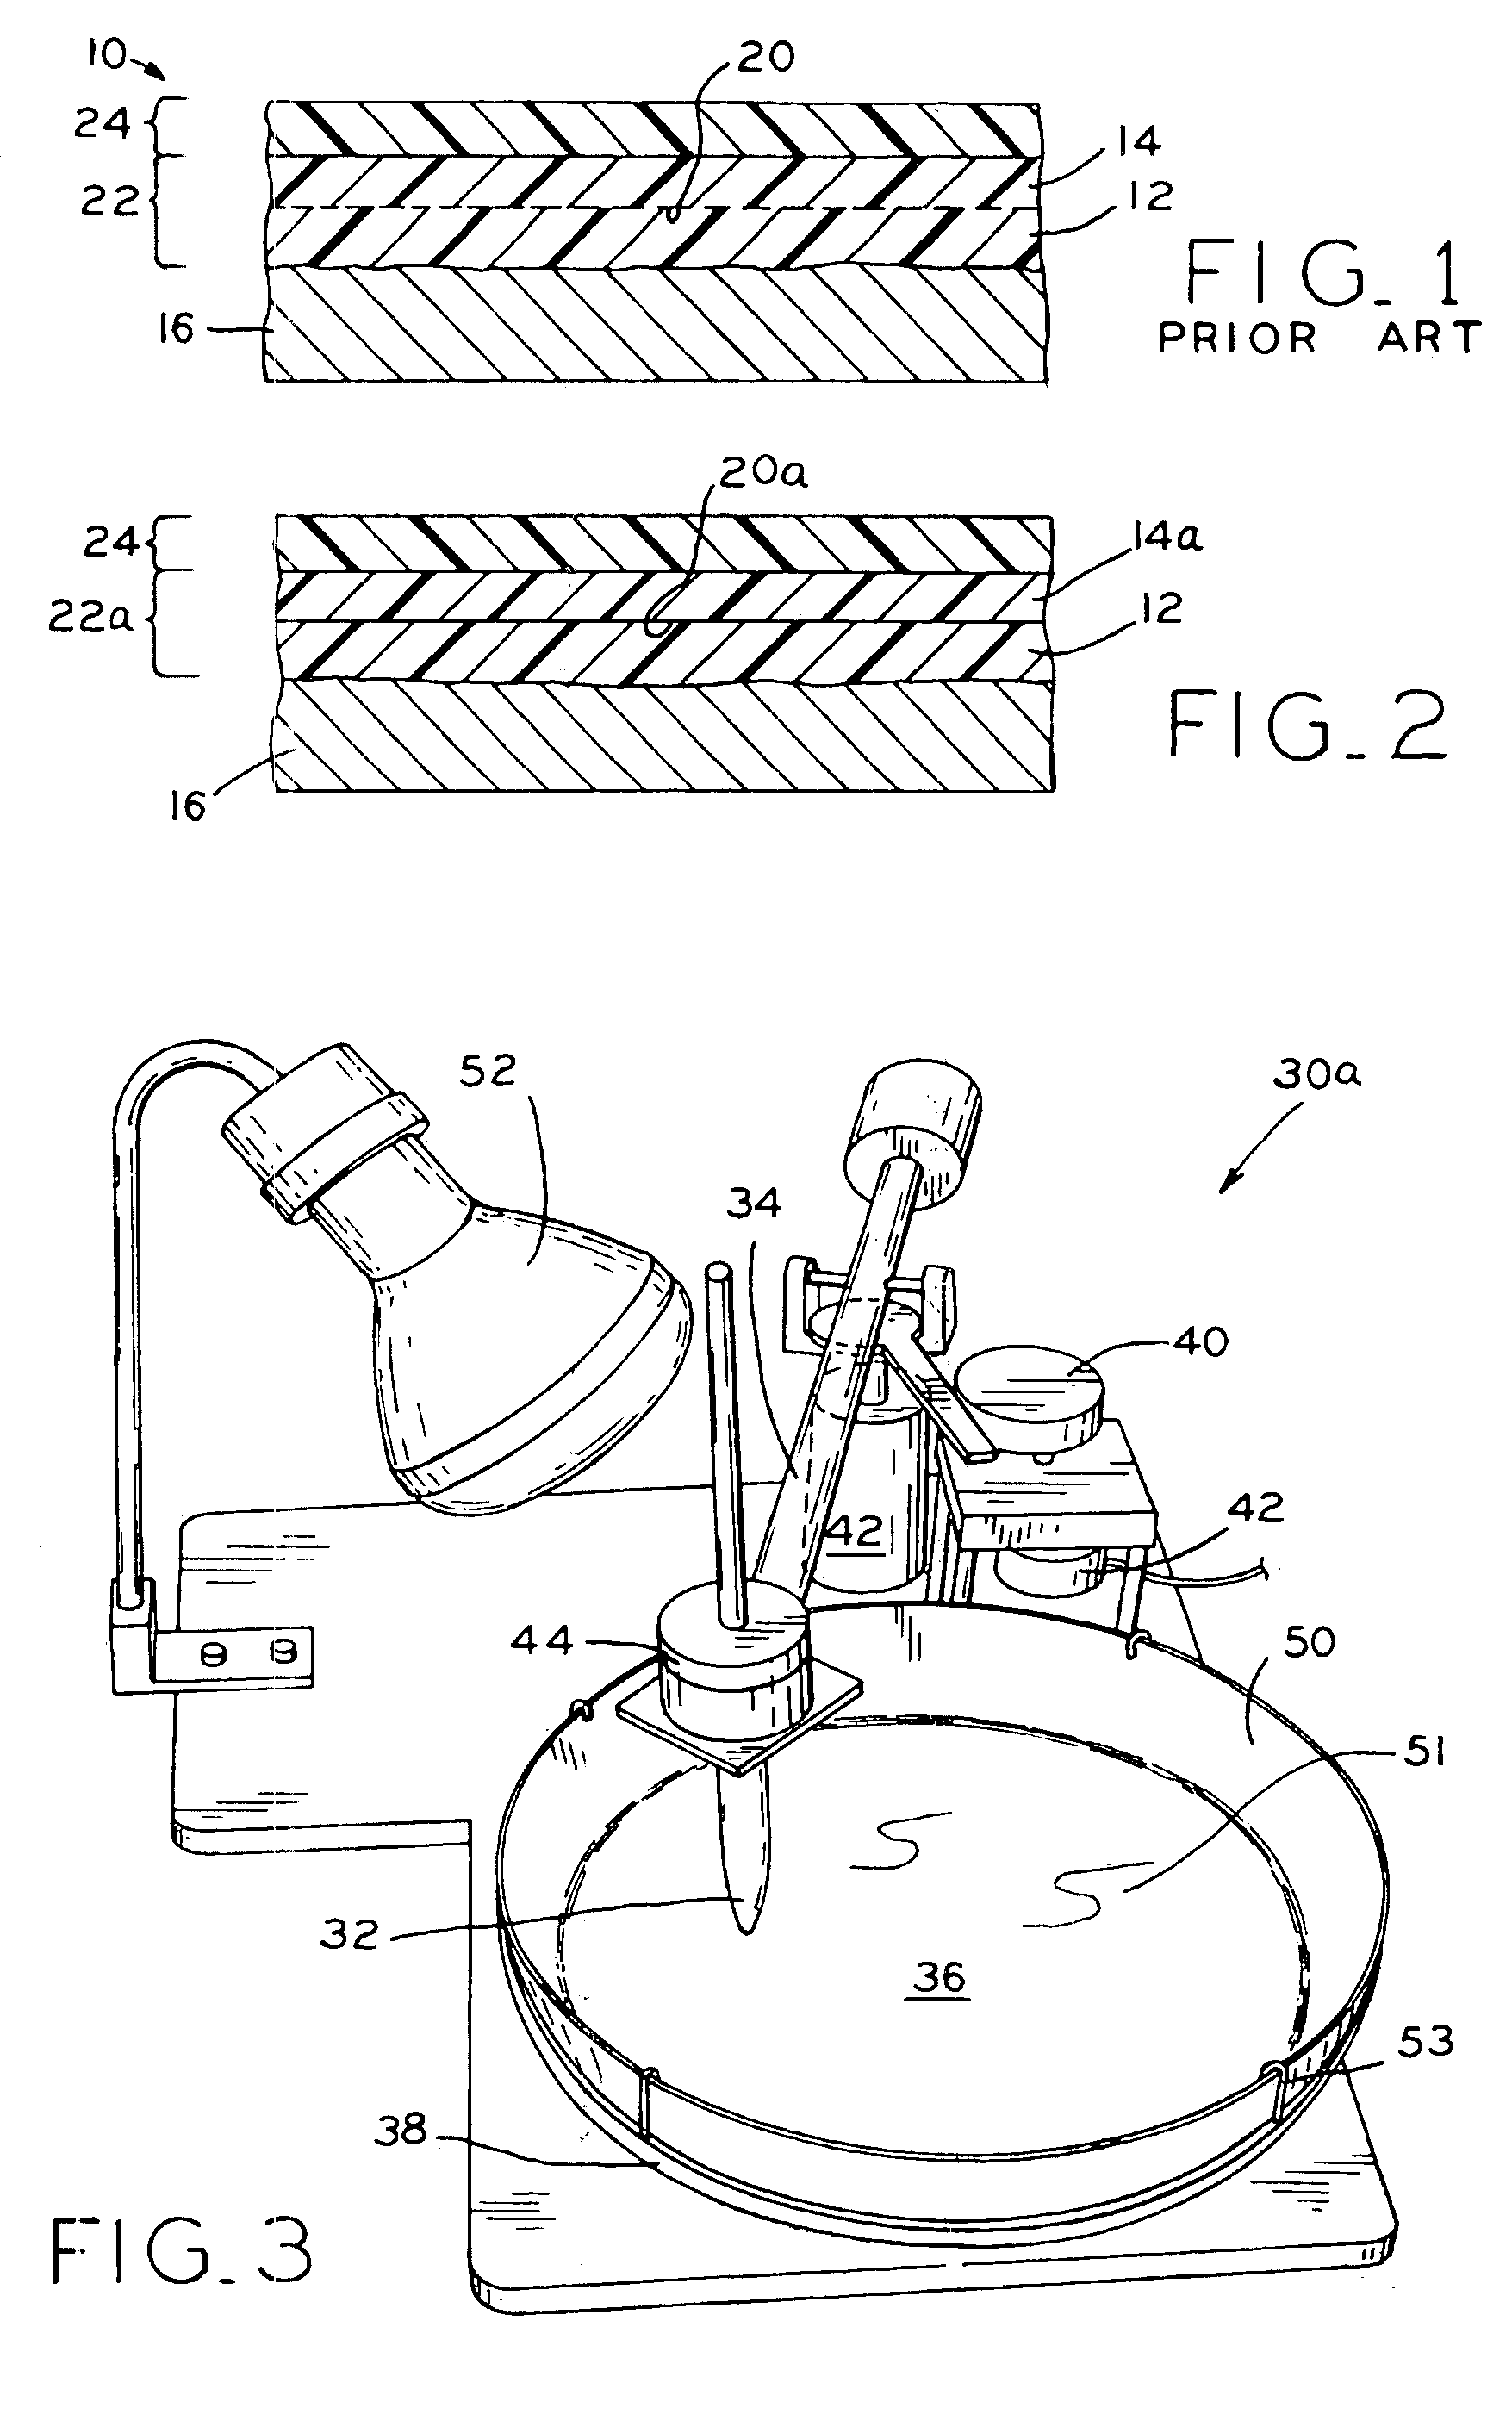 Single coat non-stick coating system and articles coated with same